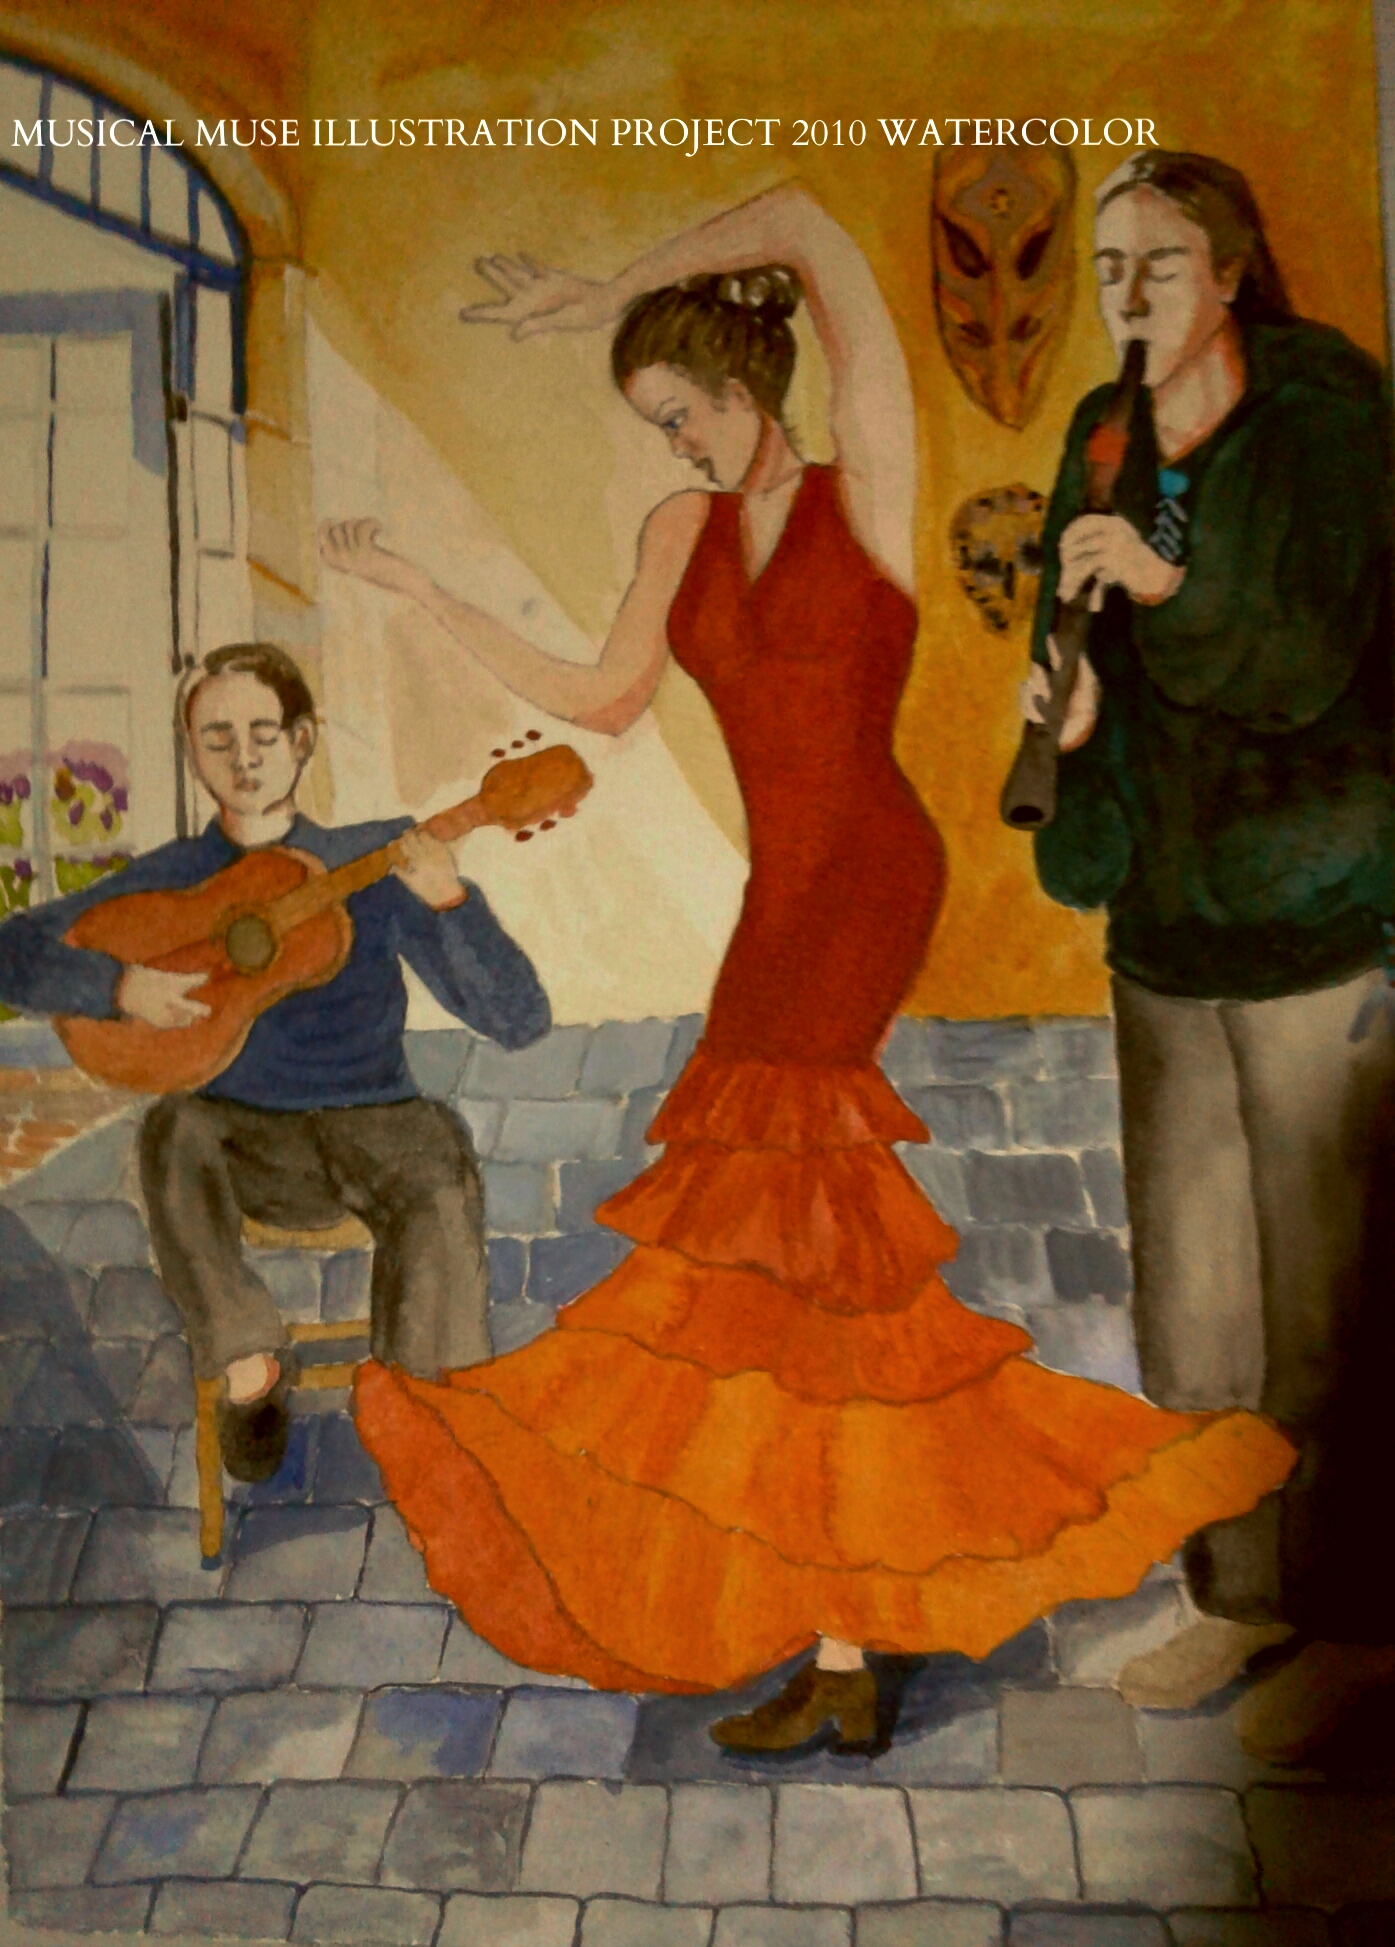  50 WATER COLOR ILLUSTRATIONS FOR A MUSIC THERAPIST  CATHERINE LACOMBE&nbsp; 